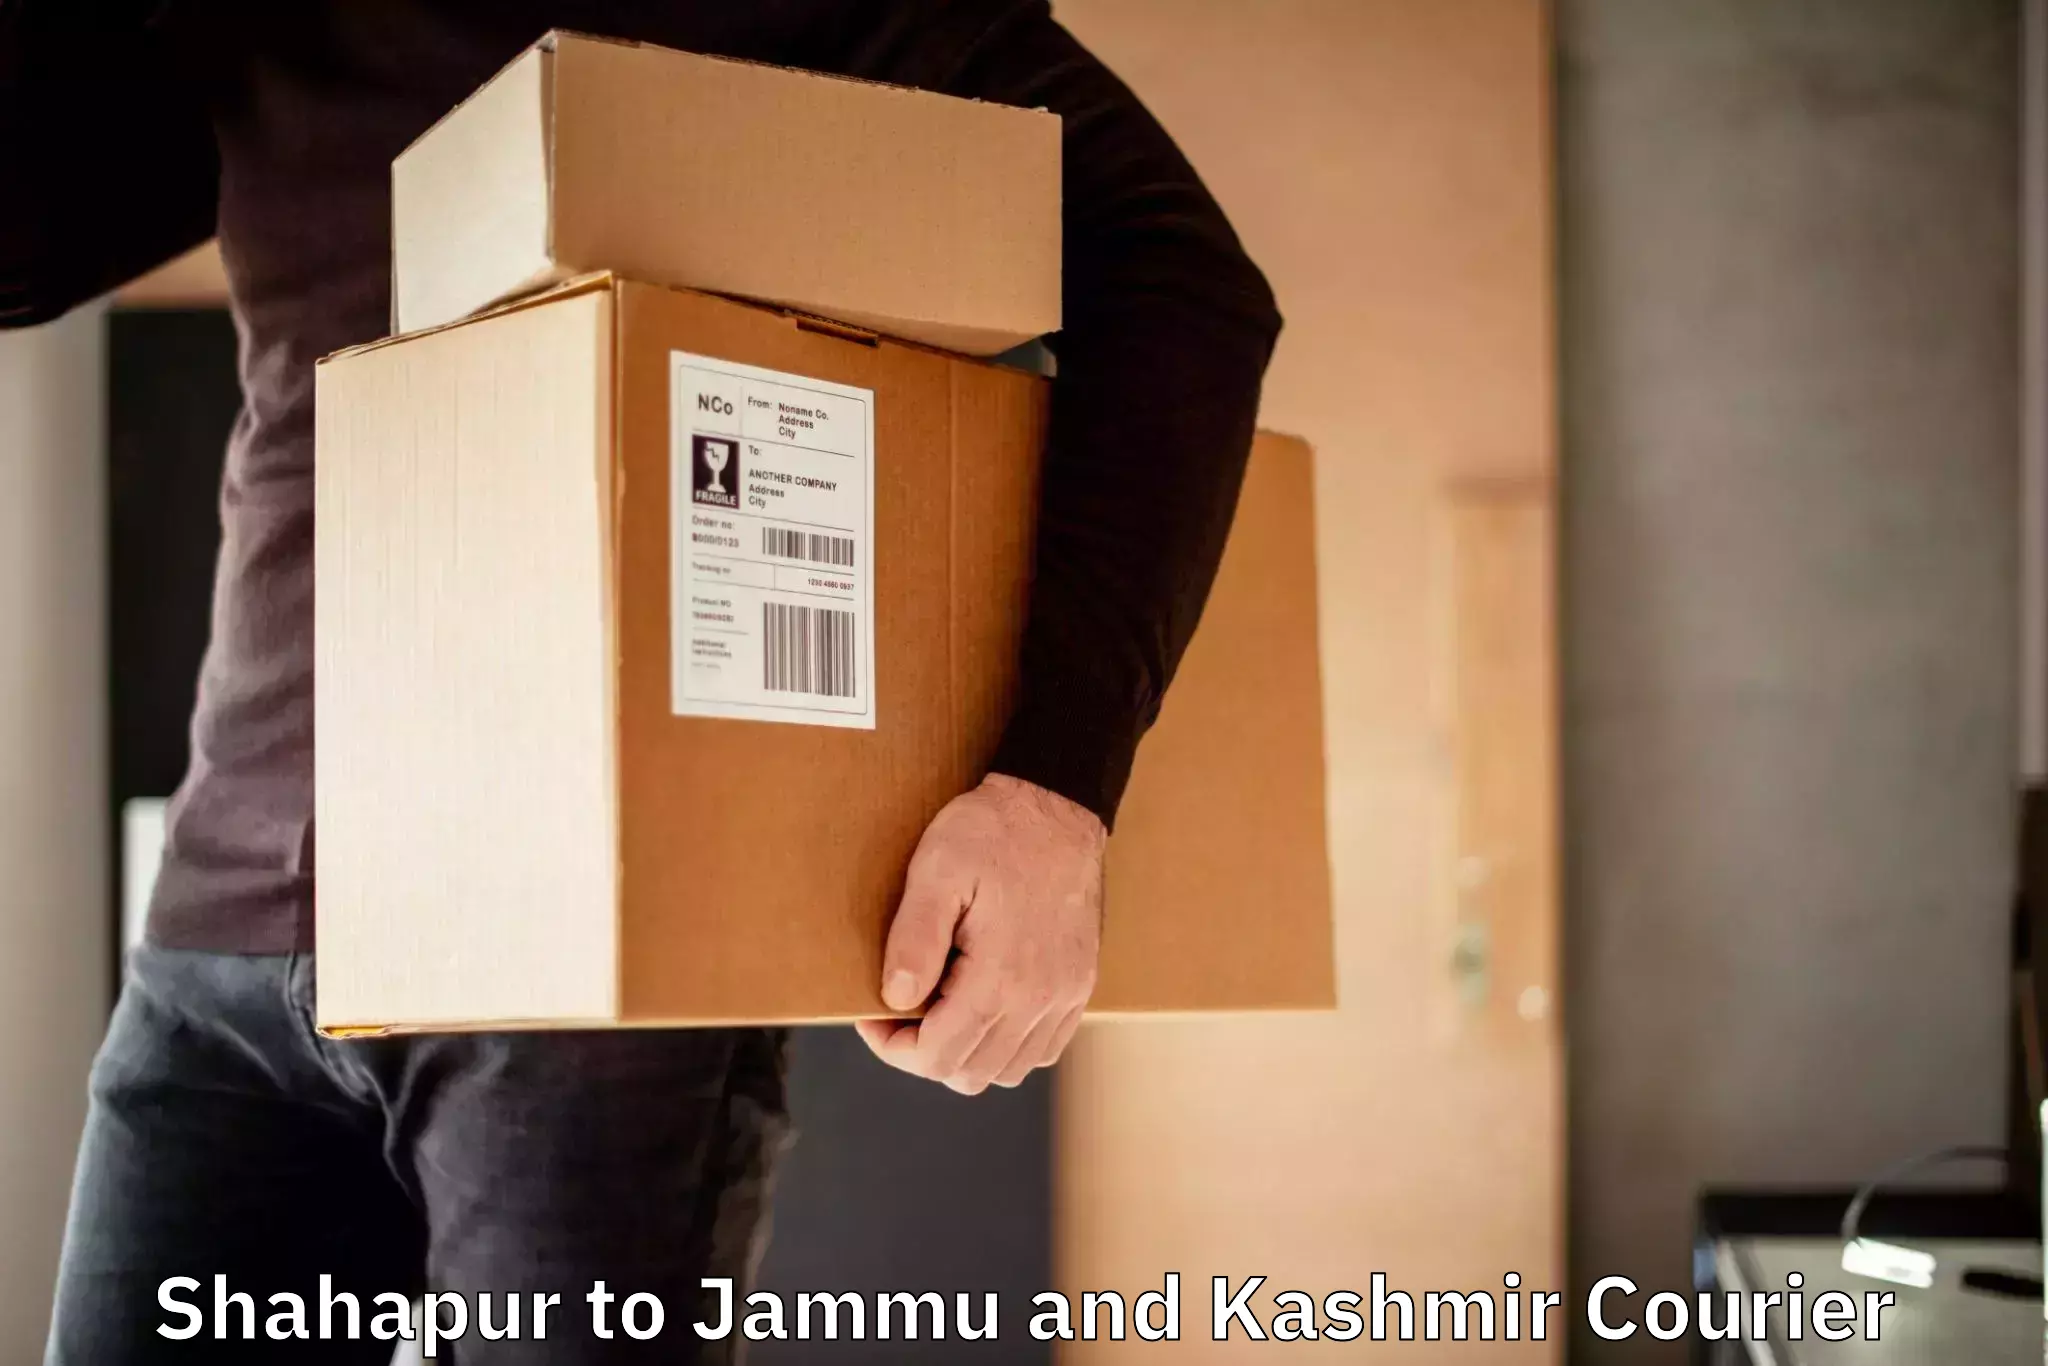 Courier service booking Shahapur to Jammu and Kashmir